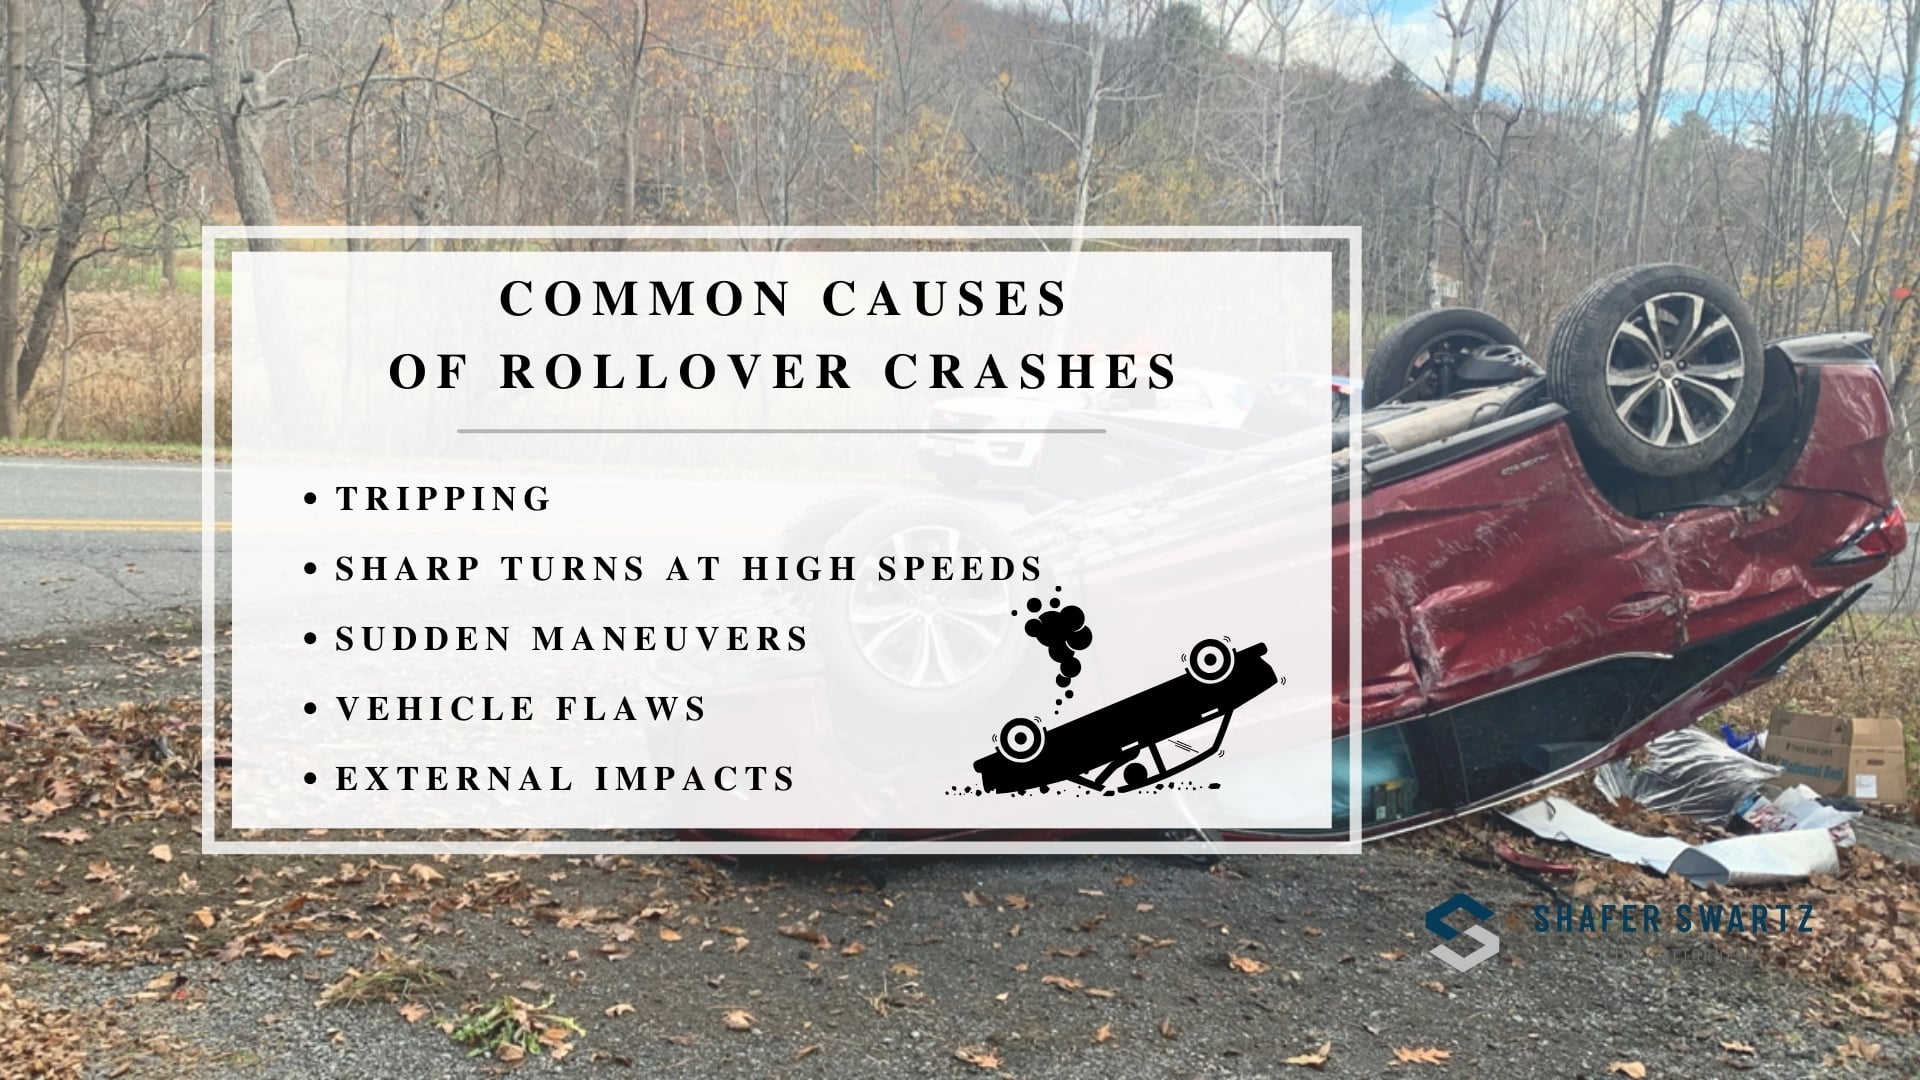 Infographic image of common causes of rollover crashes